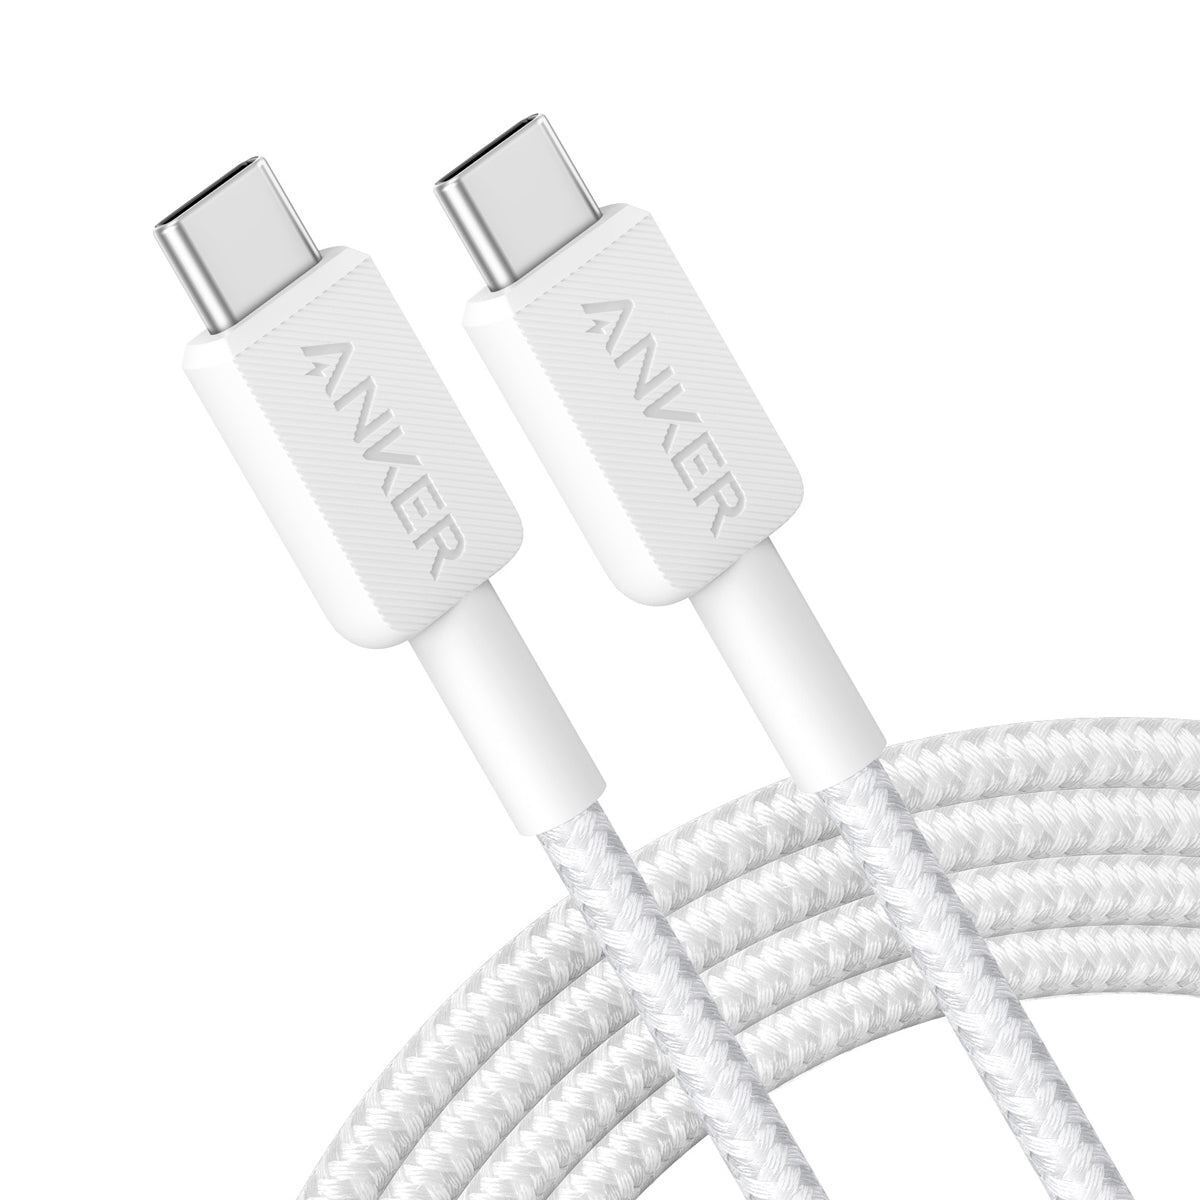 Anker 322 USB cable 1.8 m USB C White (A81F6G21)